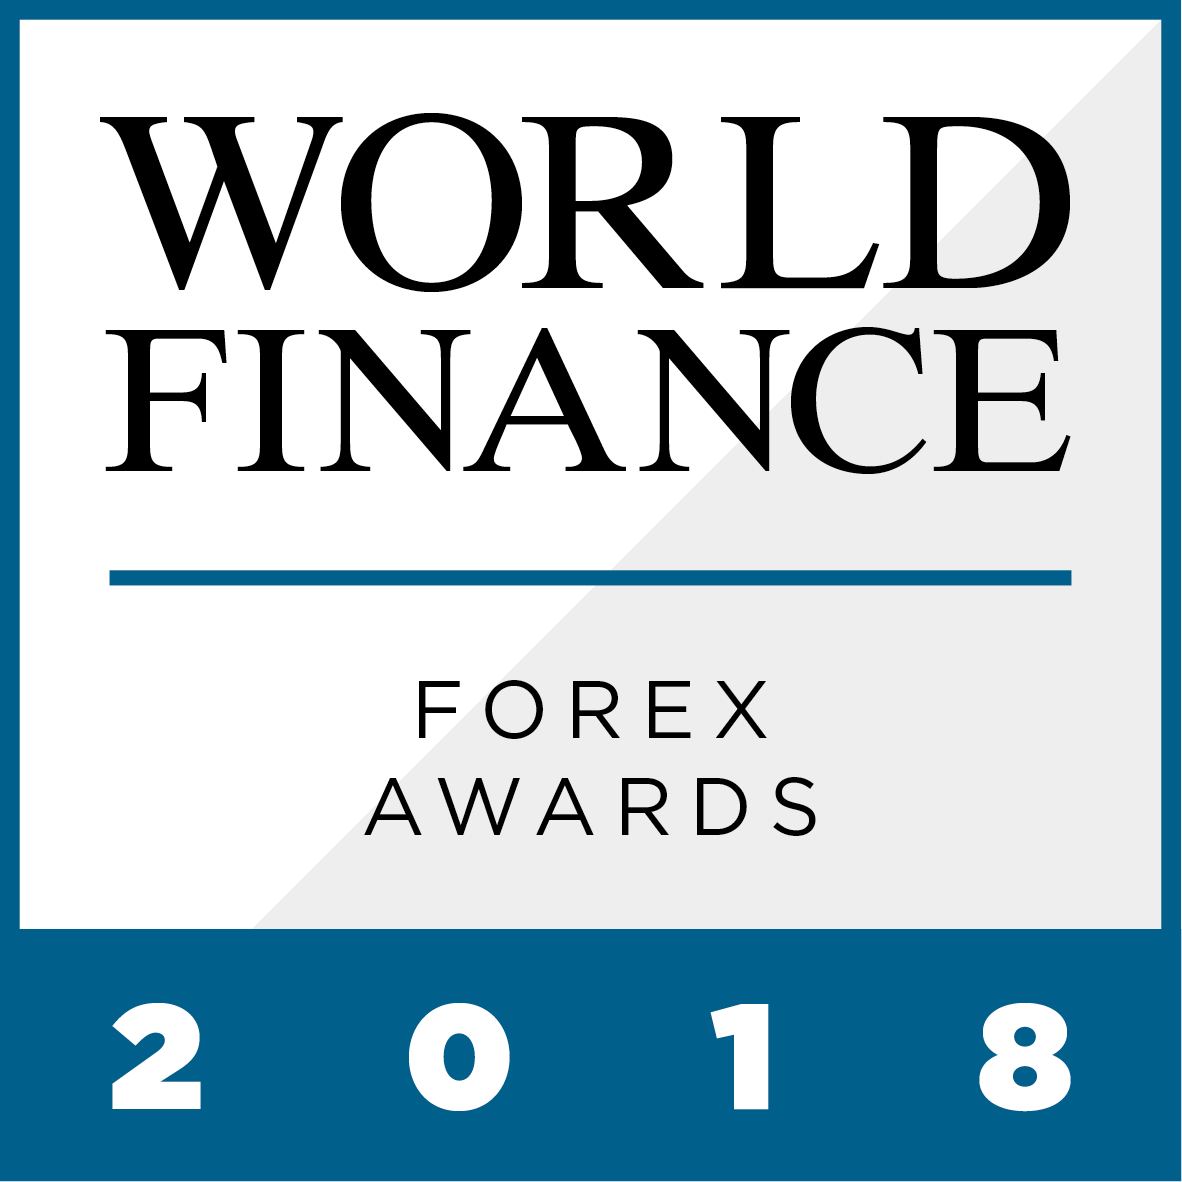 After a turbulent 2017, 2018 is shaping up to be yet another year of volatility for the forex industry. The World Finance Forex Awards 2018 celebrate the firms standing out in an ever-changing market